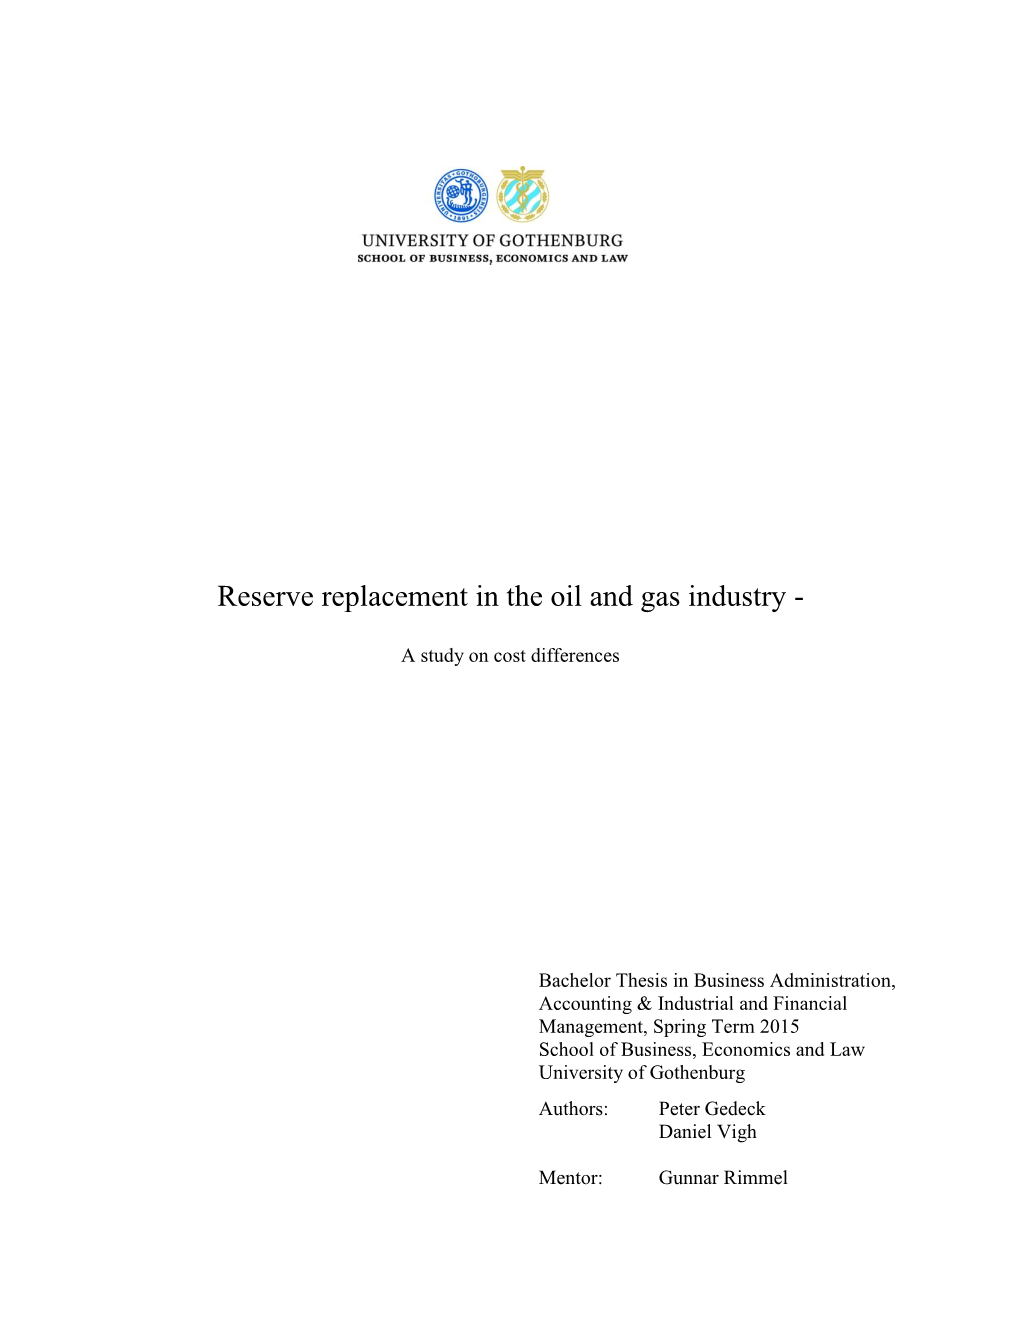 Reserve Replacement in the Oil and Gas Industry